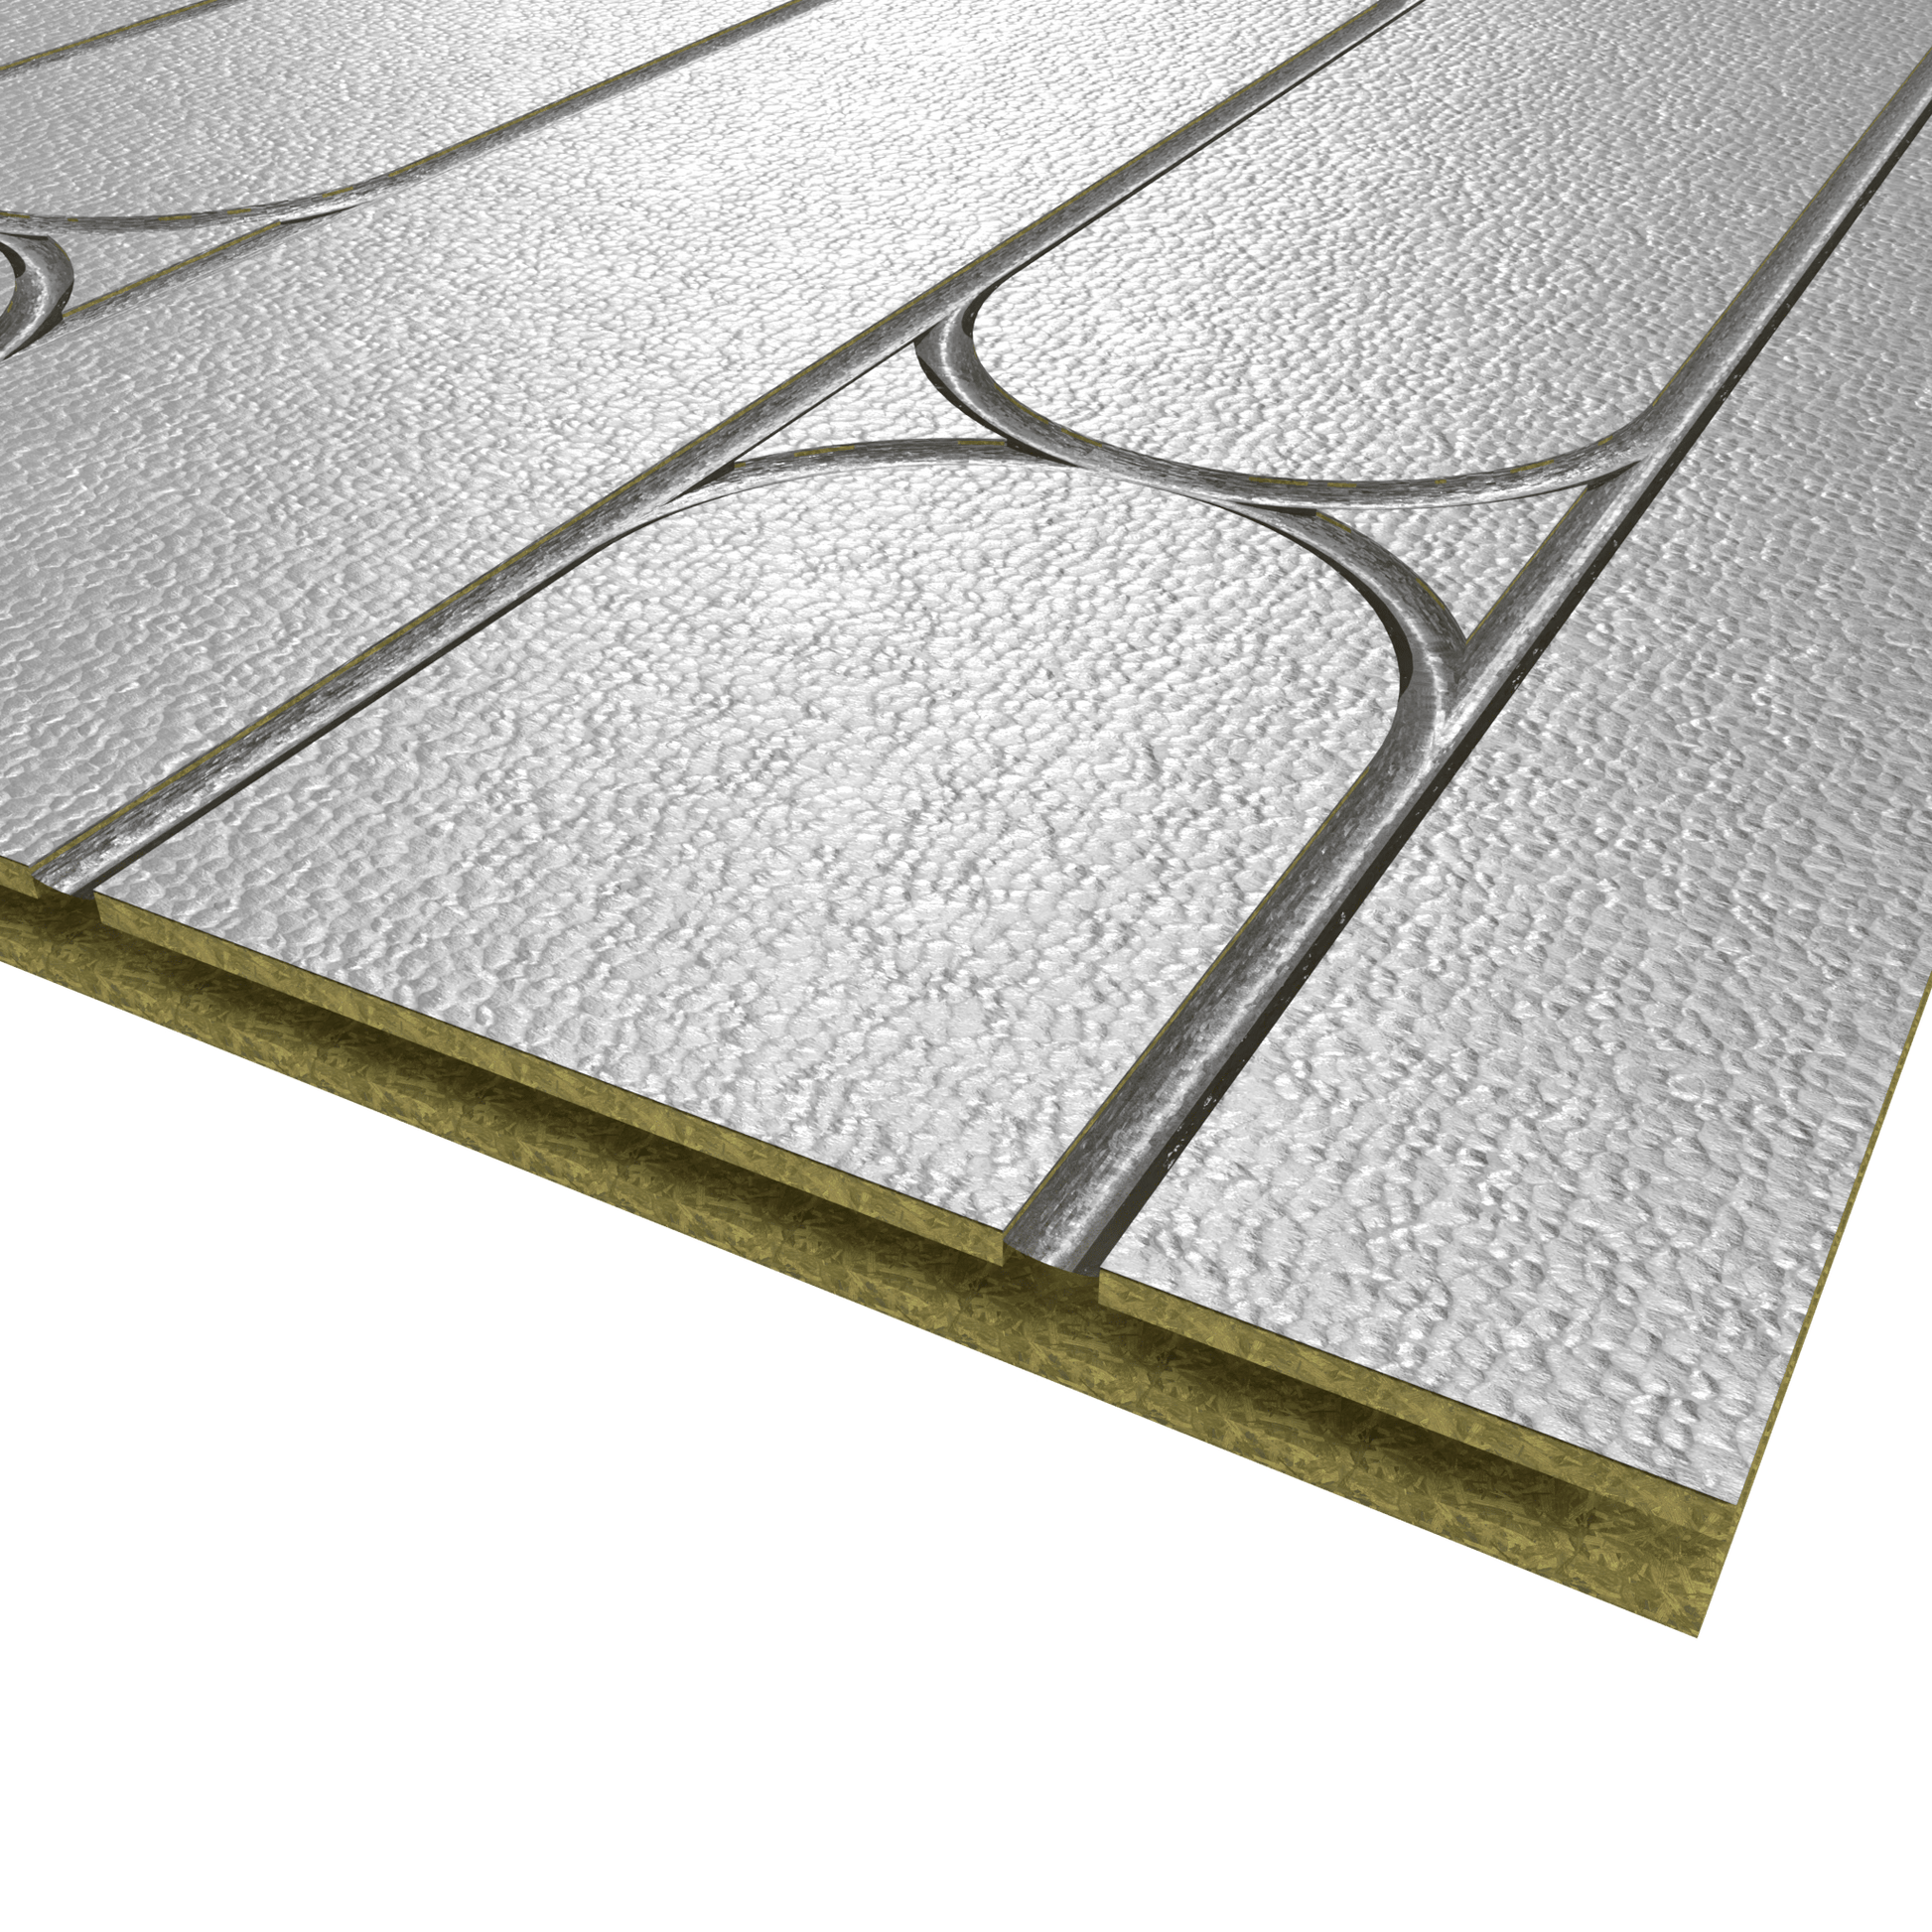 Tekwarm Routed Foil Faced Chipboard UFH Panel | 2400mm x 600mm x 22mm 150mm centers BM00052